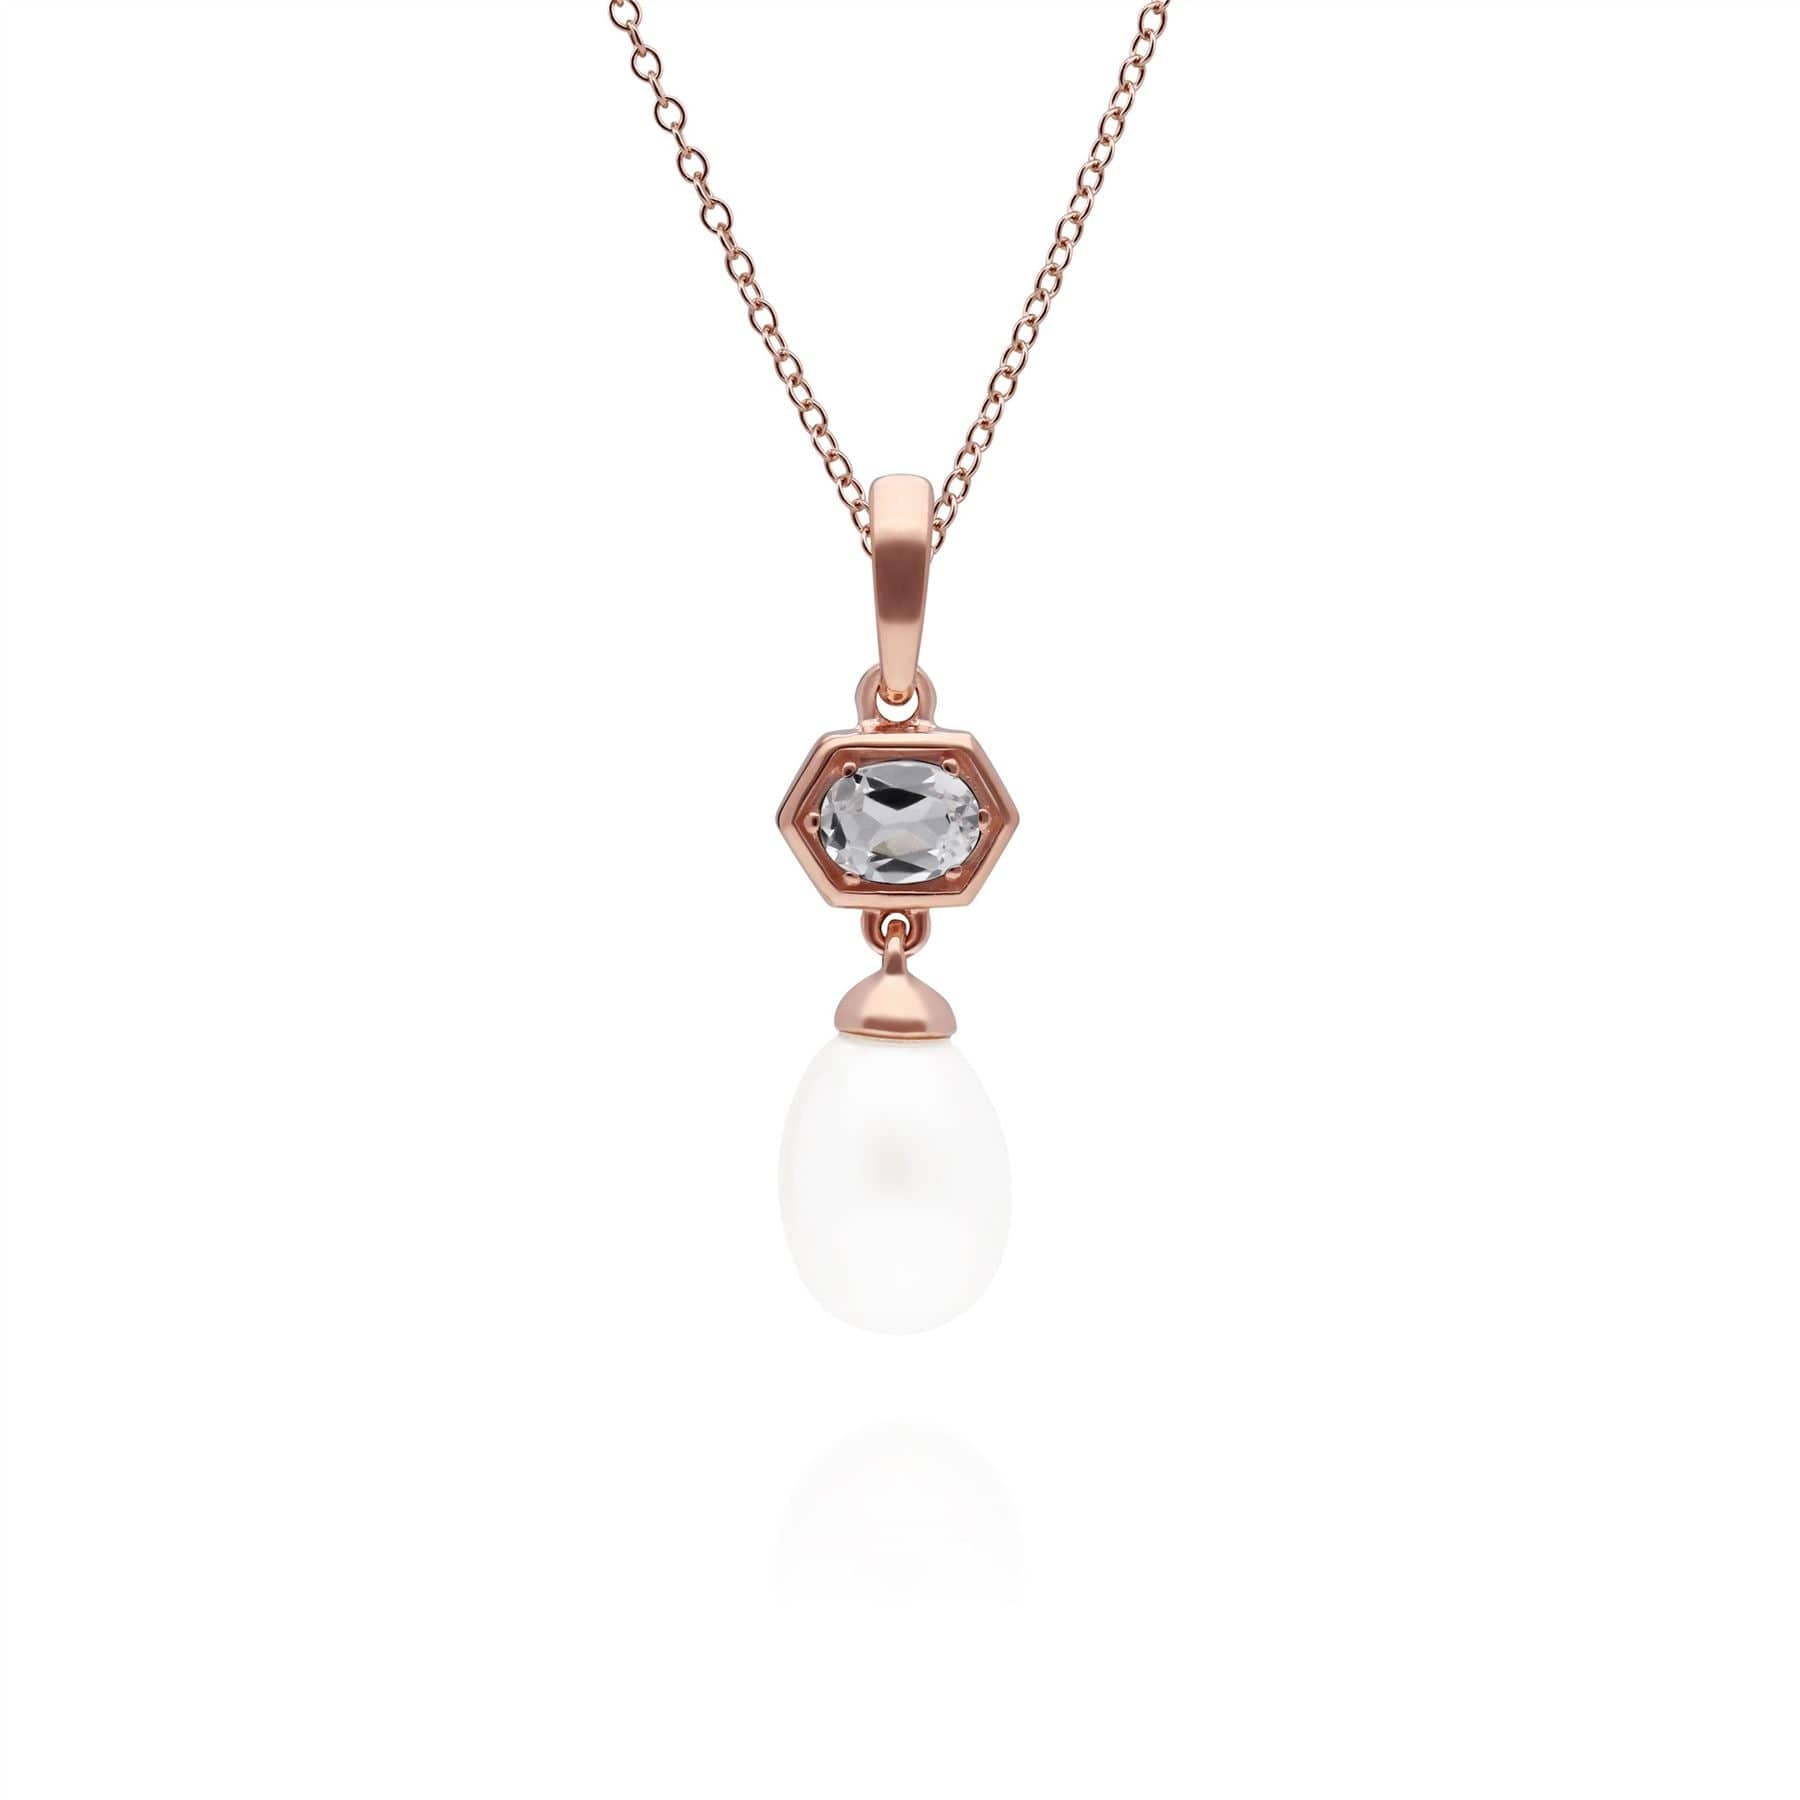 Photos - Pendant / Choker Necklace Modern Pearl & White Topaz Hexagon Drop Pendant in Rose Gold Plated Silver